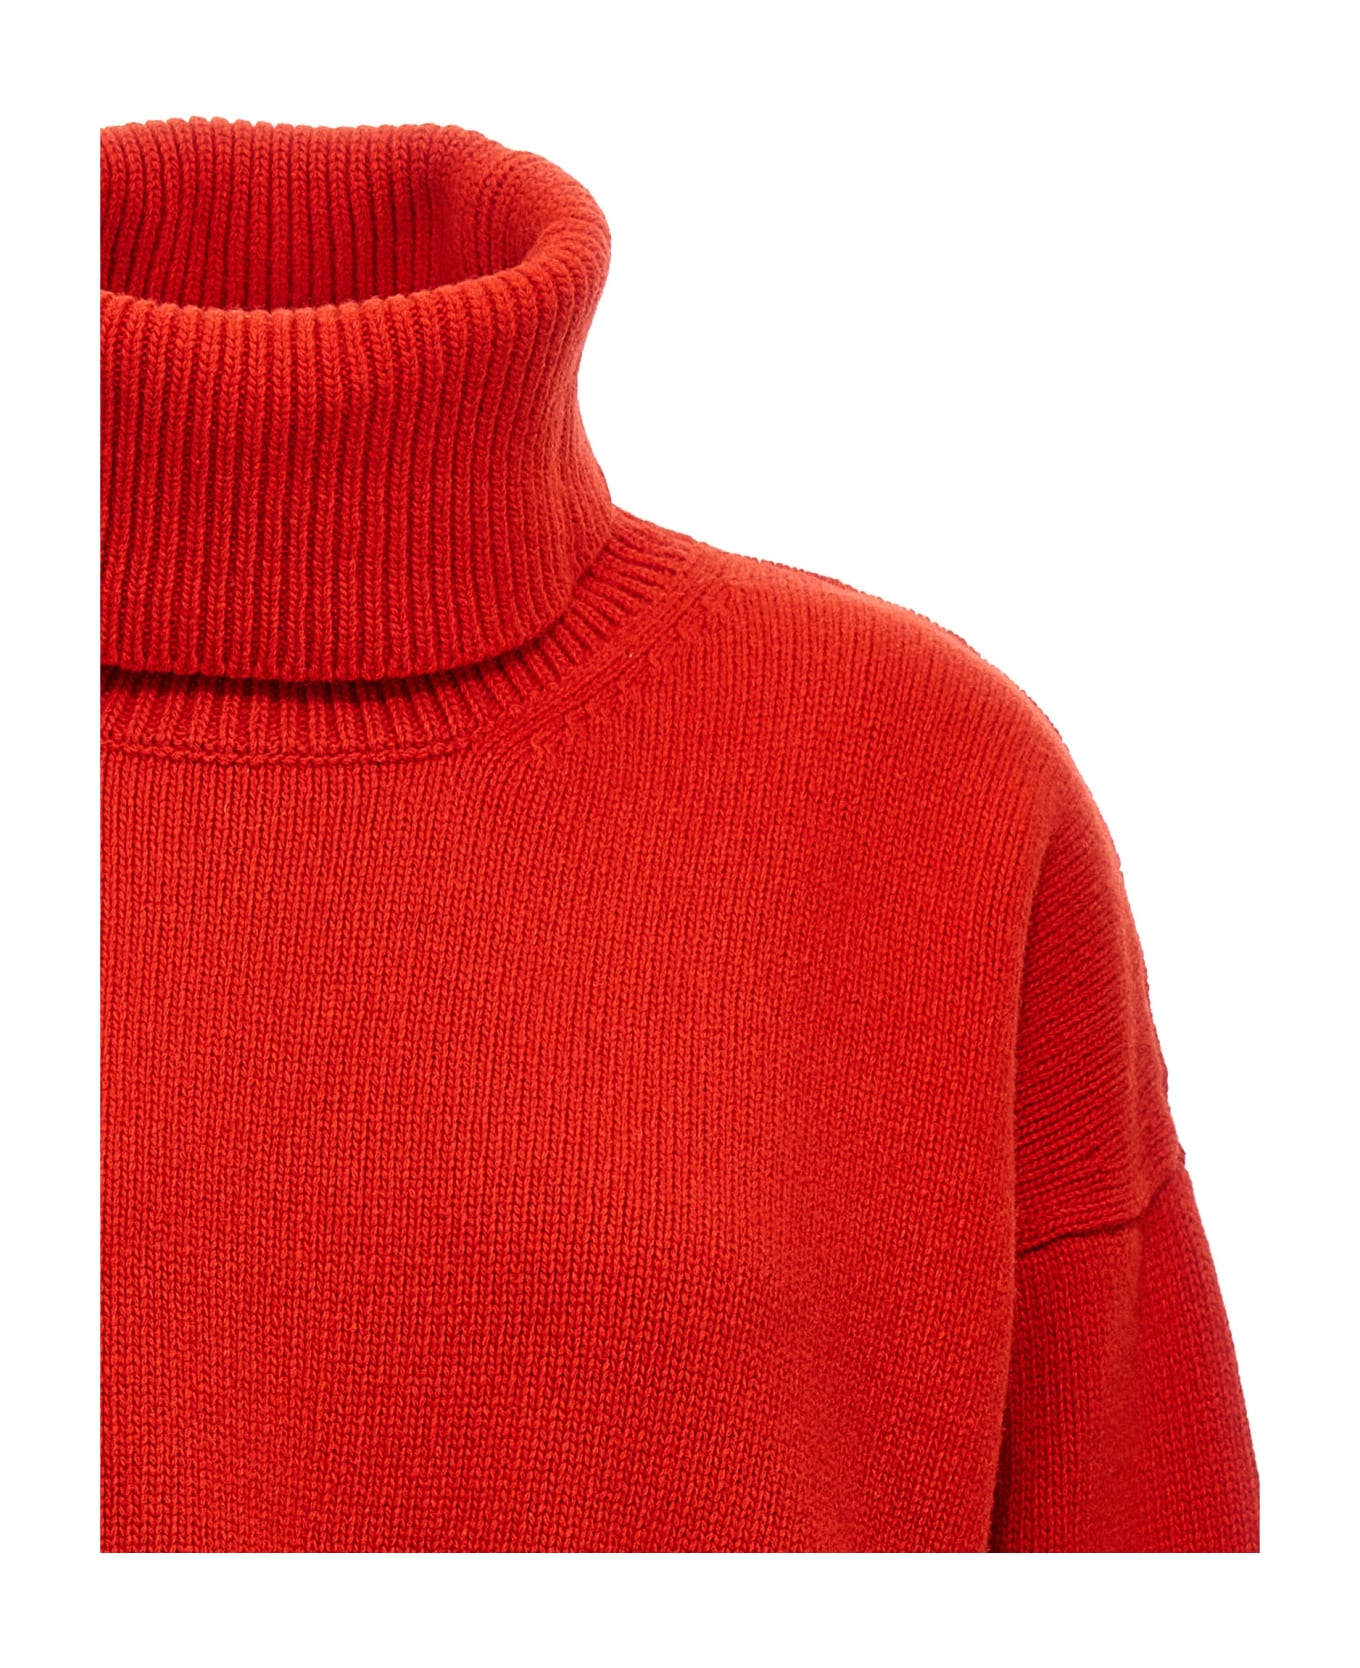 Made in Tomboy 'ely' Sweater - Red ニットウェア